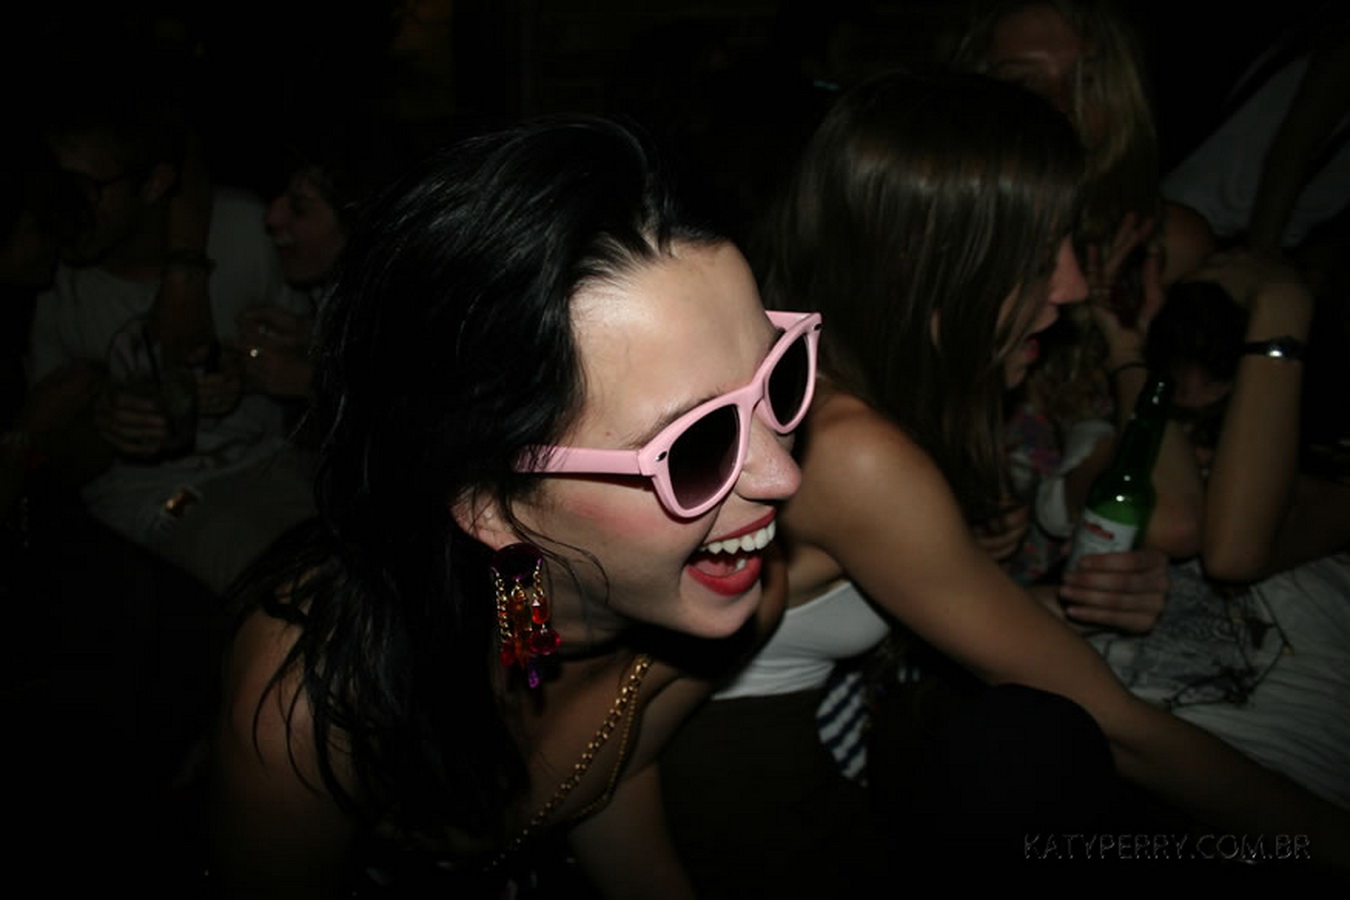 Katy_Perry_bobsslip_drunk_cleavage_downblouse_upskirt_nipslip_at_her_birthday_2007_party_99x_HQ_43.jpg